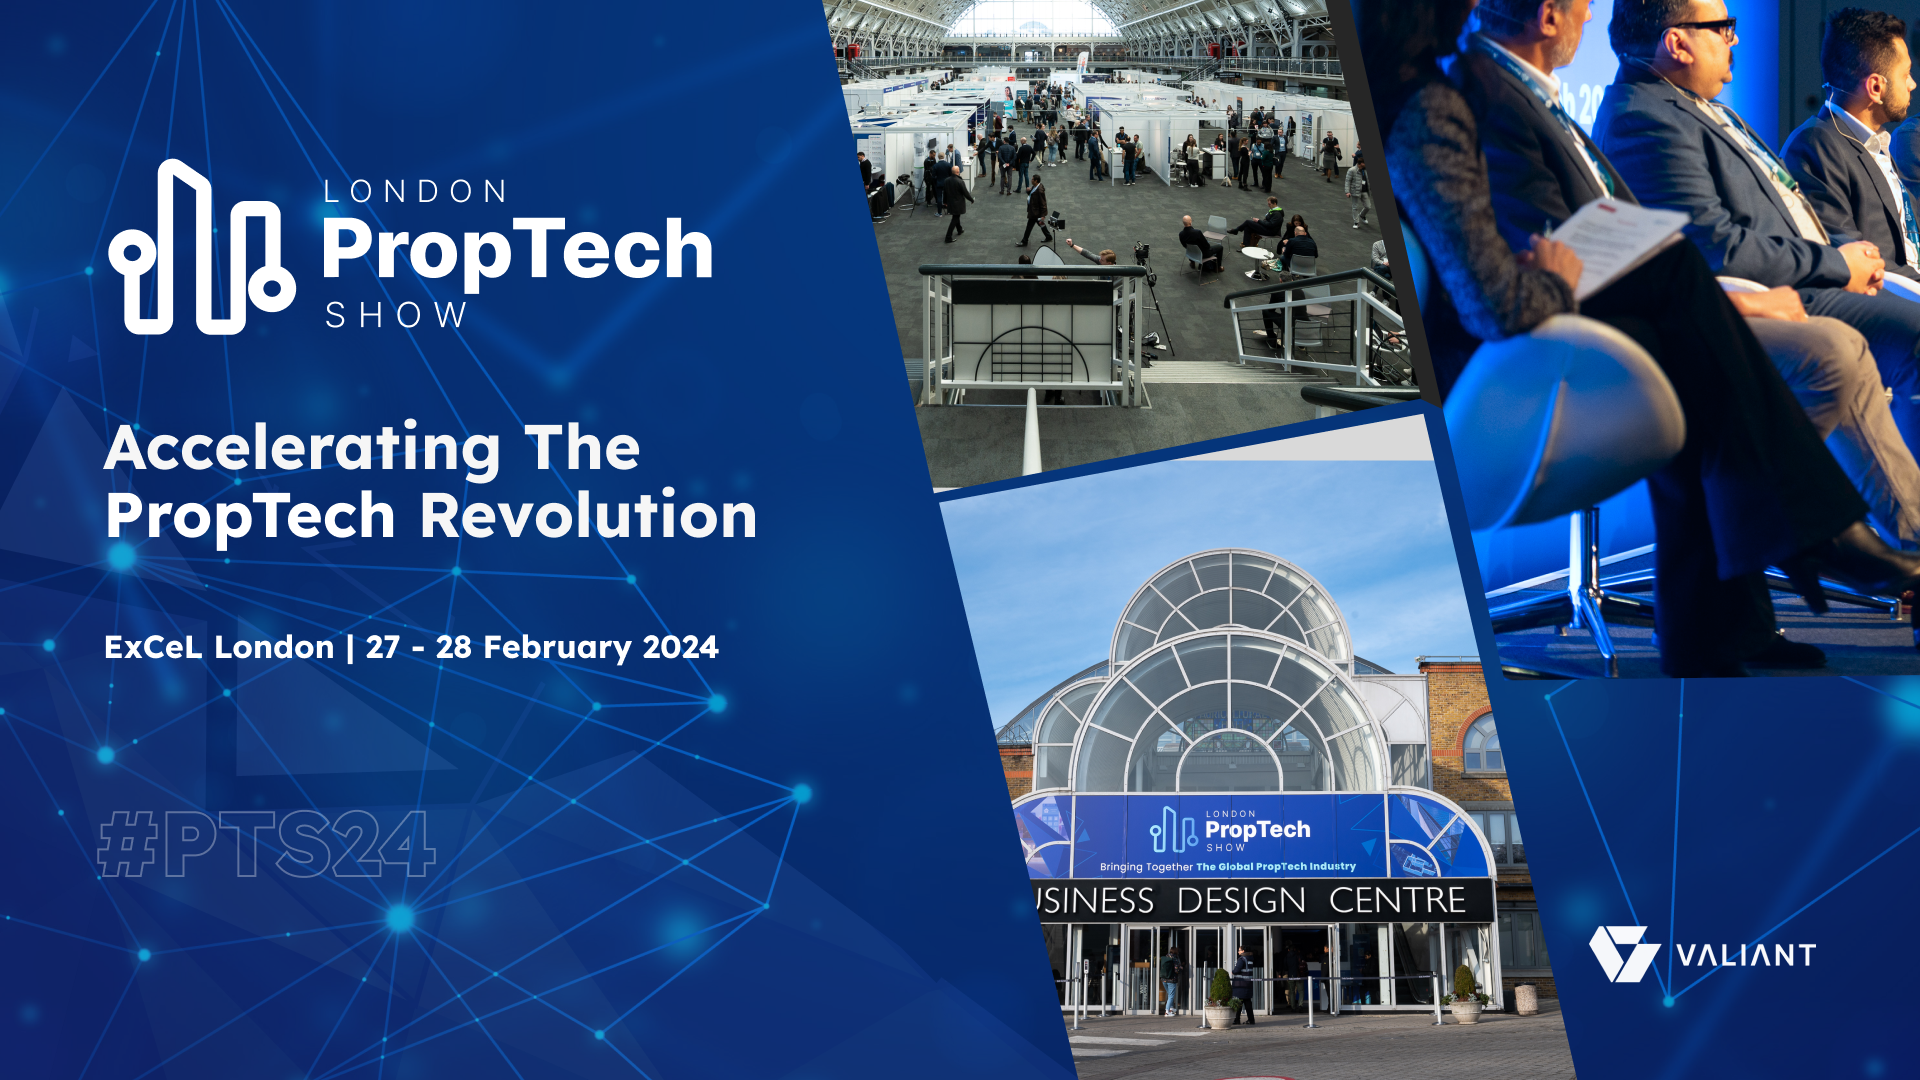 London PropTech Show Is Back With Its 2nd Edition From 27 - 28 Feb 2024 At ExceL London